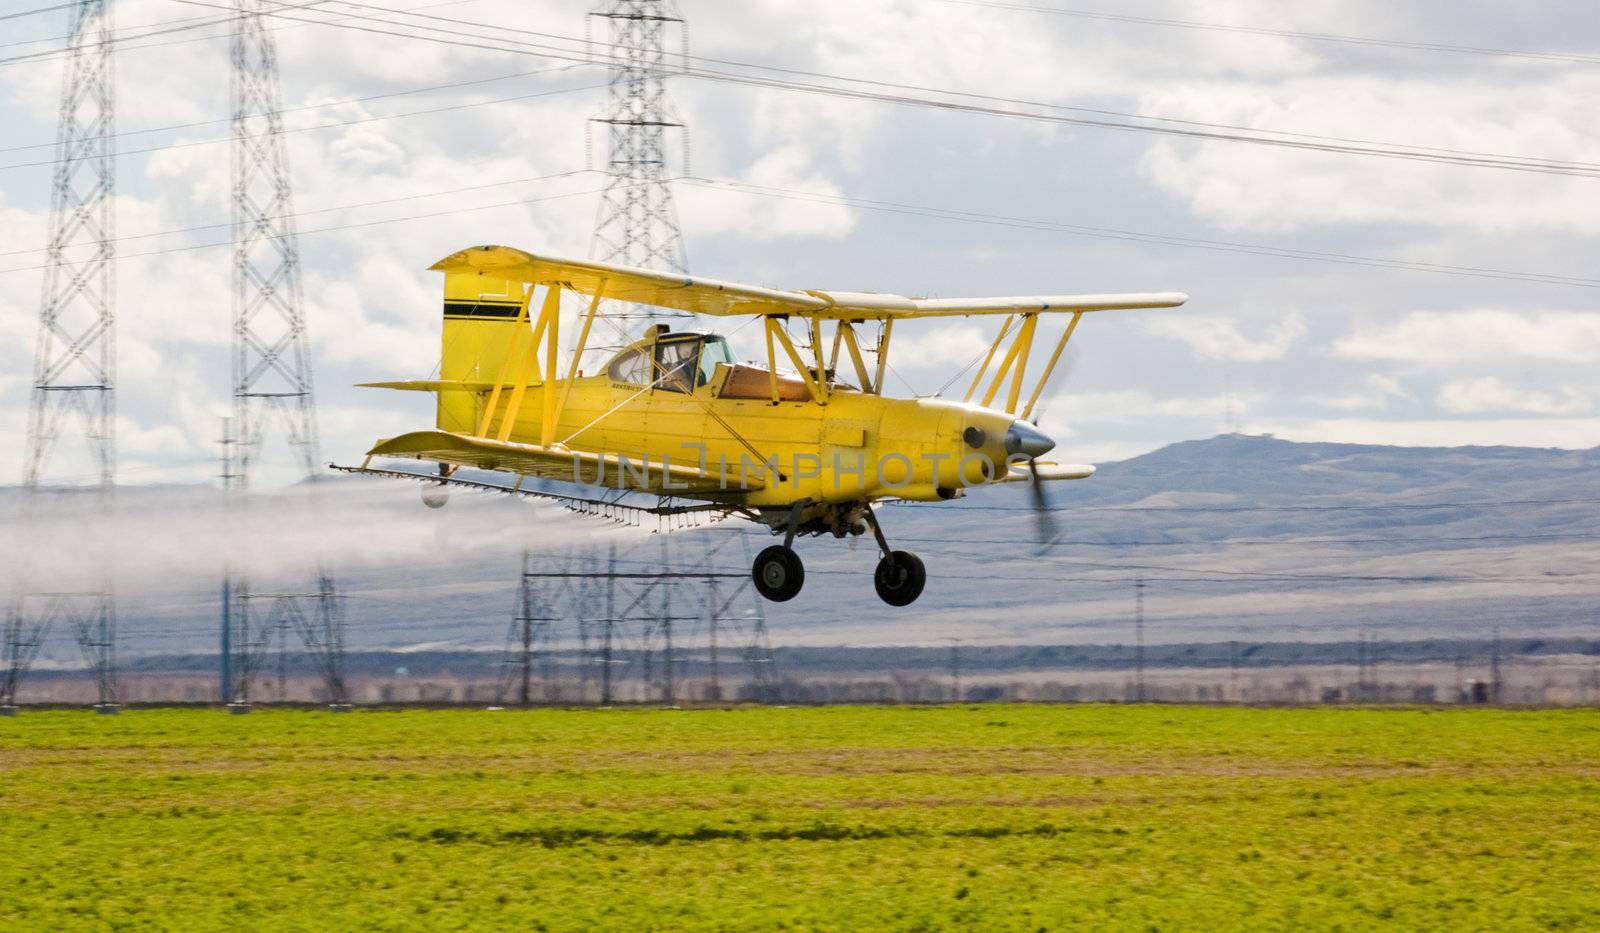 crop duster spraying insecticide on crops in central California